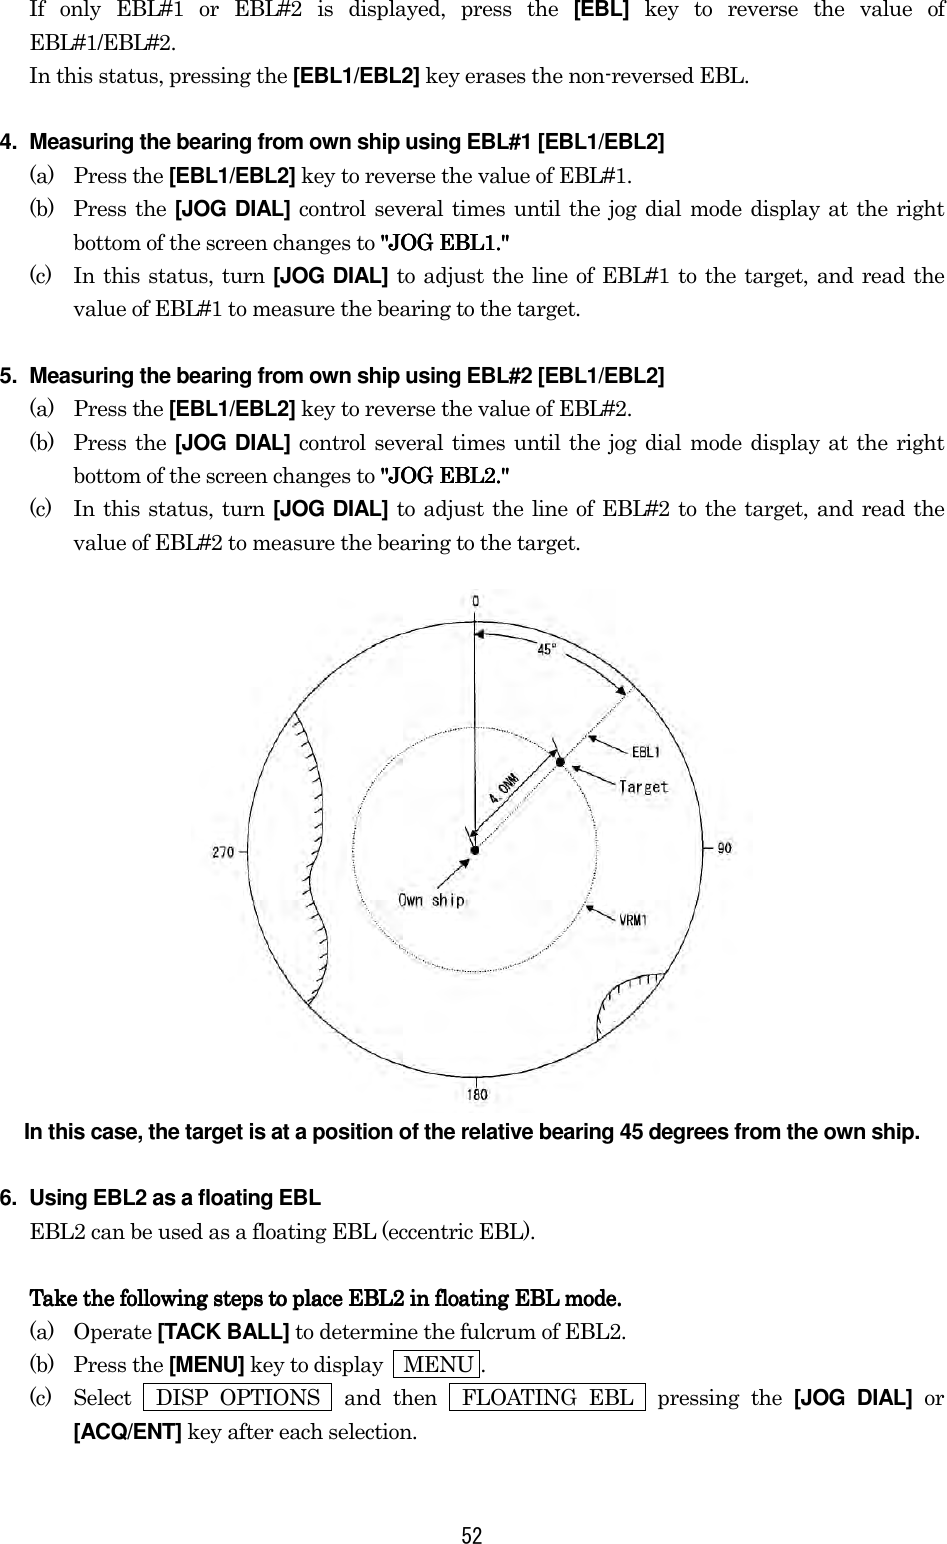 52 If only EBL#1 or EBL#2 is displayed, press the [EBL] key to reverse the value of EBL#1/EBL#2. In this status, pressing the [EBL1/EBL2] key erases the non-reversed EBL. 4.  Measuring the bearing from own ship using EBL#1 [EBL1/EBL2] (a) Press the [EBL1/EBL2] key to reverse the value of EBL#1. (b) Press the [JOG DIAL] control several times until the jog dial mode display at the right bottom of the screen changes to &quot;JOG EBL1.&quot;&quot;JOG EBL1.&quot;&quot;JOG EBL1.&quot;&quot;JOG EBL1.&quot; (c)  In this status, turn [JOG DIAL] to adjust the line of EBL#1 to the target, and read the value of EBL#1 to measure the bearing to the target. 5.  Measuring the bearing from own ship using EBL#2 [EBL1/EBL2] (a) Press the [EBL1/EBL2] key to reverse the value of EBL#2. (b) Press the [JOG DIAL] control several times until the jog dial mode display at the right bottom of the screen changes to &quot;JOG EBL2.&quot;&quot;JOG EBL2.&quot;&quot;JOG EBL2.&quot;&quot;JOG EBL2.&quot; (c)  In this status, turn [JOG DIAL] to adjust the line of EBL#2 to the target, and read the value of EBL#2 to measure the bearing to the target.  In this case, the target is at a position of the relative bearing 45 degrees from the own ship. 6.  Using EBL2 as a floating EBL EBL2 can be used as a floating EBL (eccentric EBL).  Take the following steps to place EBL2 in floating EBL mode.Take the following steps to place EBL2 in floating EBL mode.Take the following steps to place EBL2 in floating EBL mode.Take the following steps to place EBL2 in floating EBL mode.    (a) Operate [TACK BALL] to determine the fulcrum of EBL2. (b) Press the [MENU] key to display    MENU . (c)  Select  DISP OPTIONS  and then  FLOATING EBL  pressing the [JOG DIAL] or [ACQ/ENT] key after each selection. 